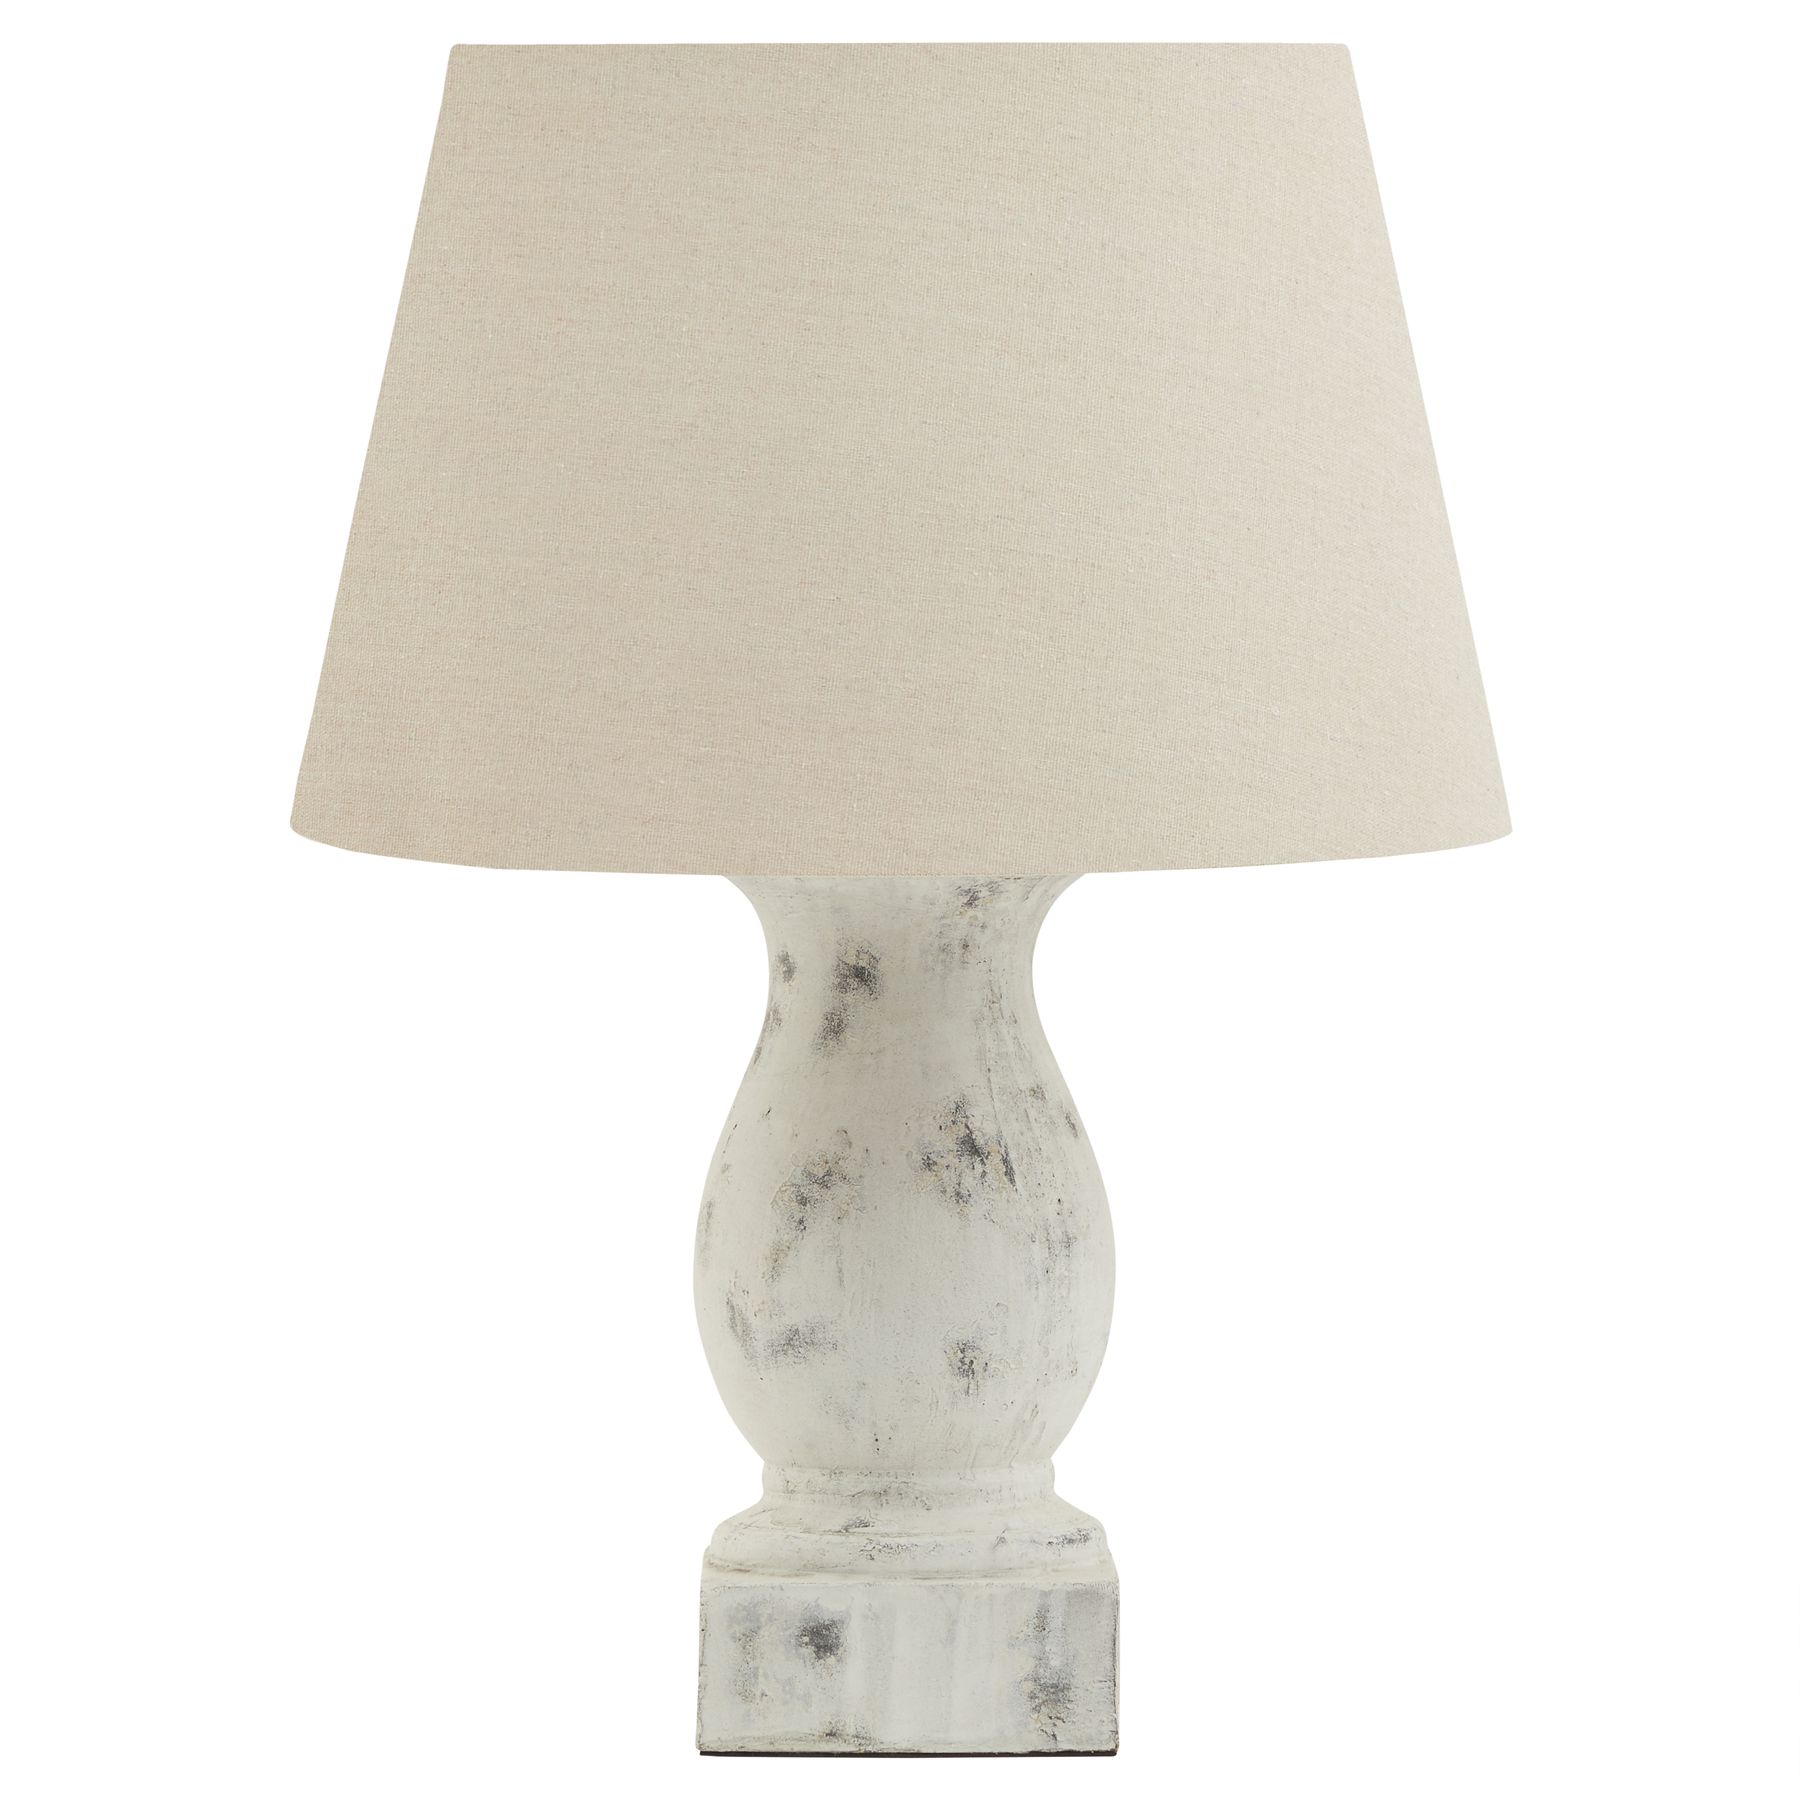 Darcy Antique White Pillar Table Lamp With Linen Shade - Image 1